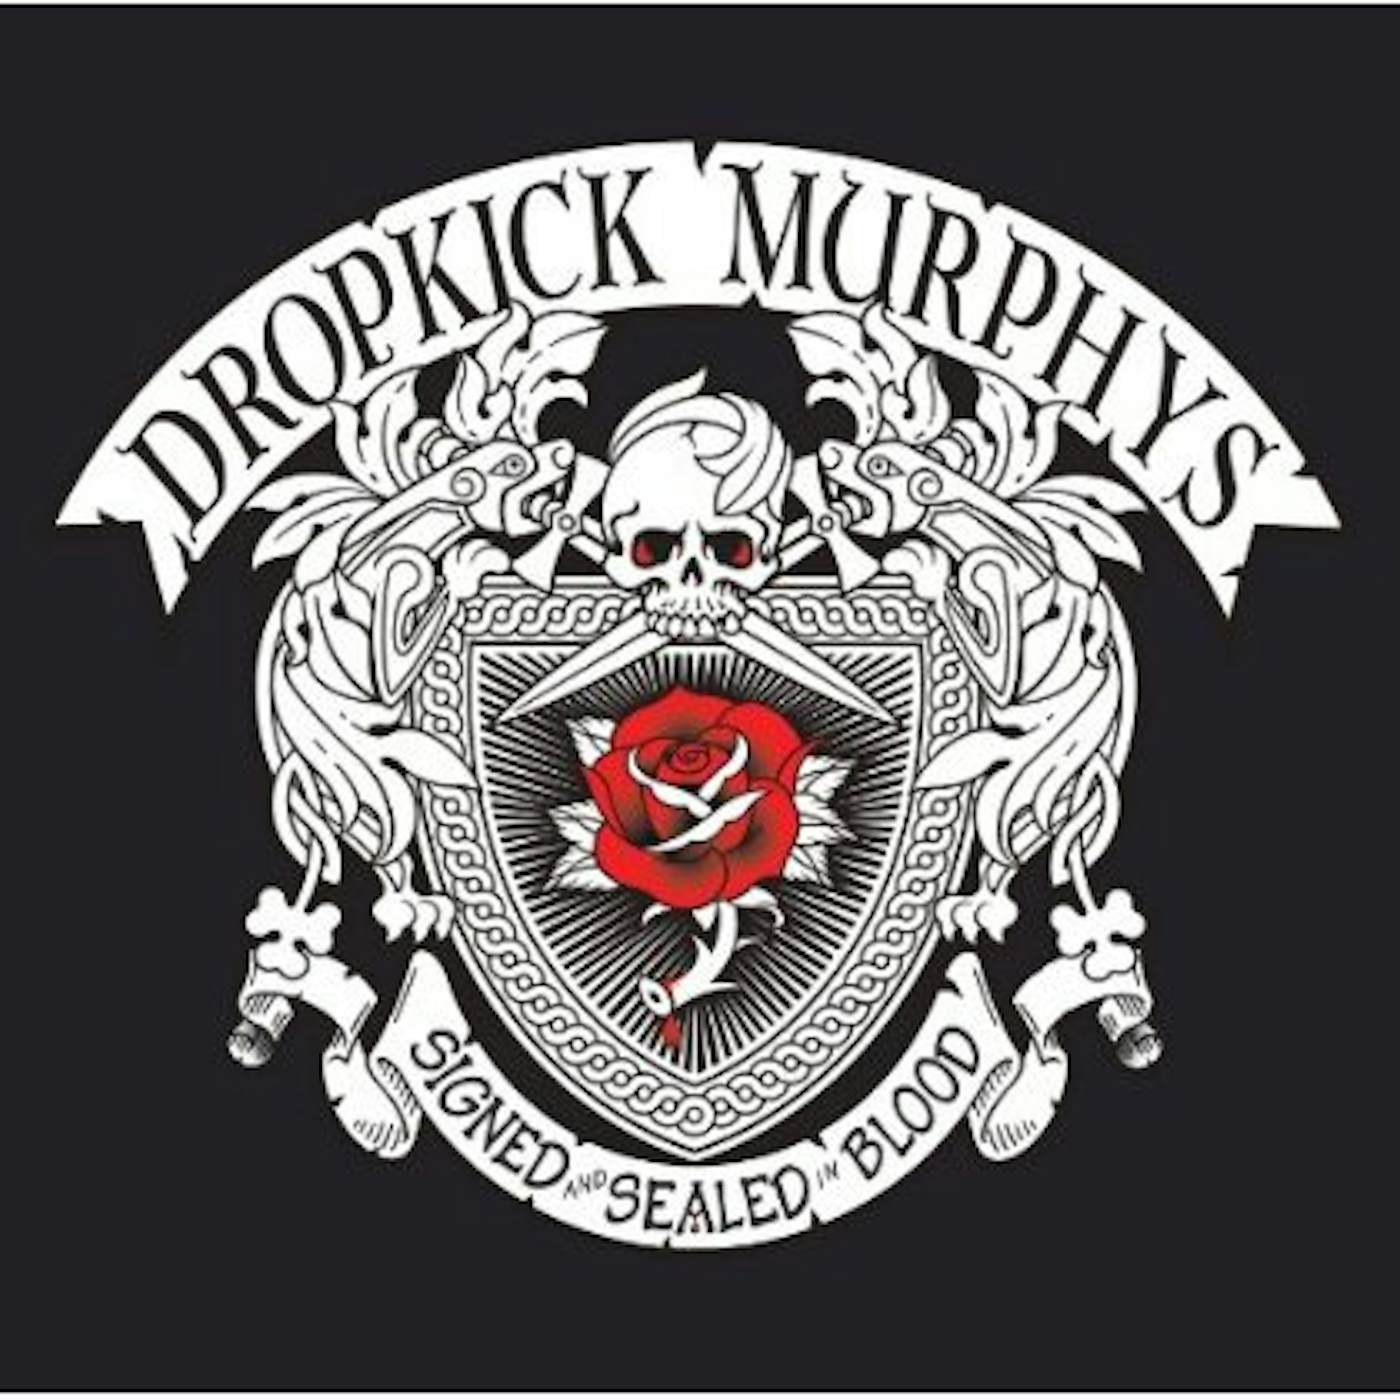 Dropkick Murphys Signed And Sealed In Blood Vinyl Record